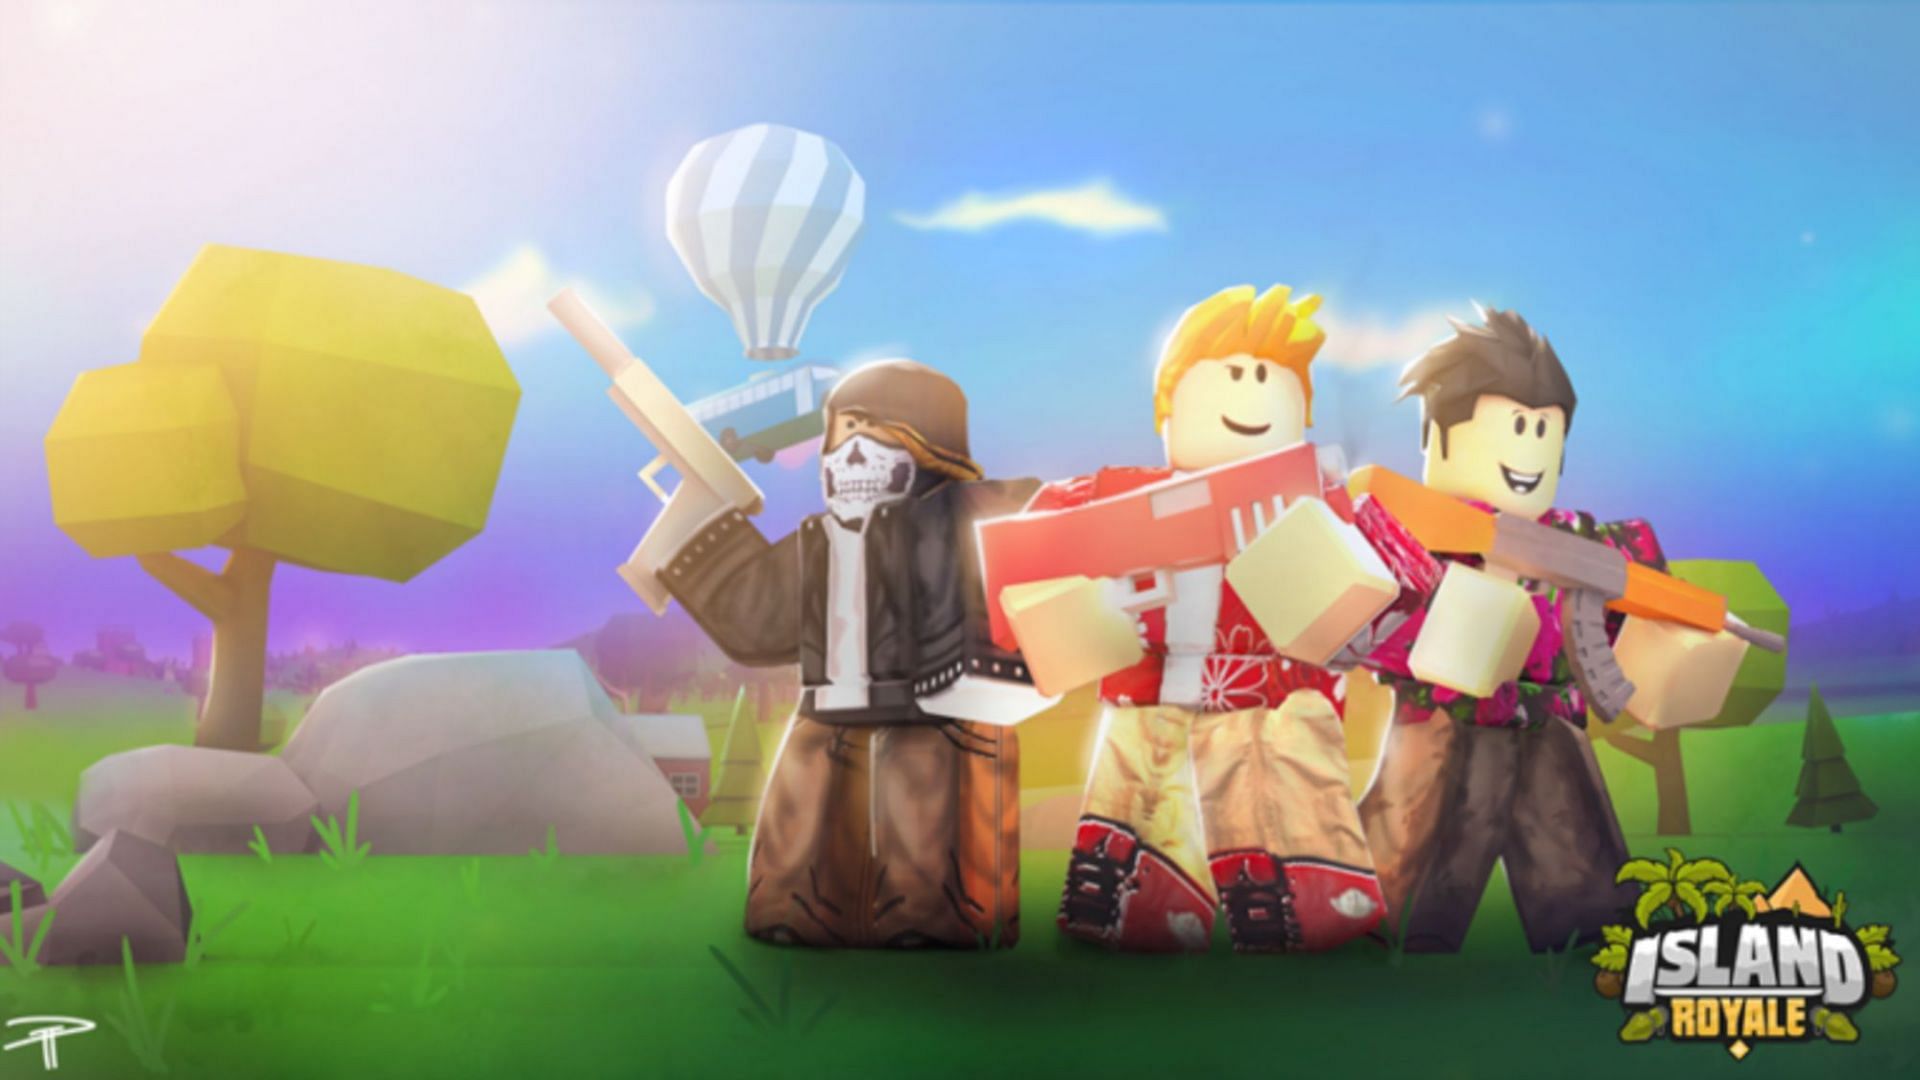 Survive in the wild environment of Island Royale (Image via Roblox)